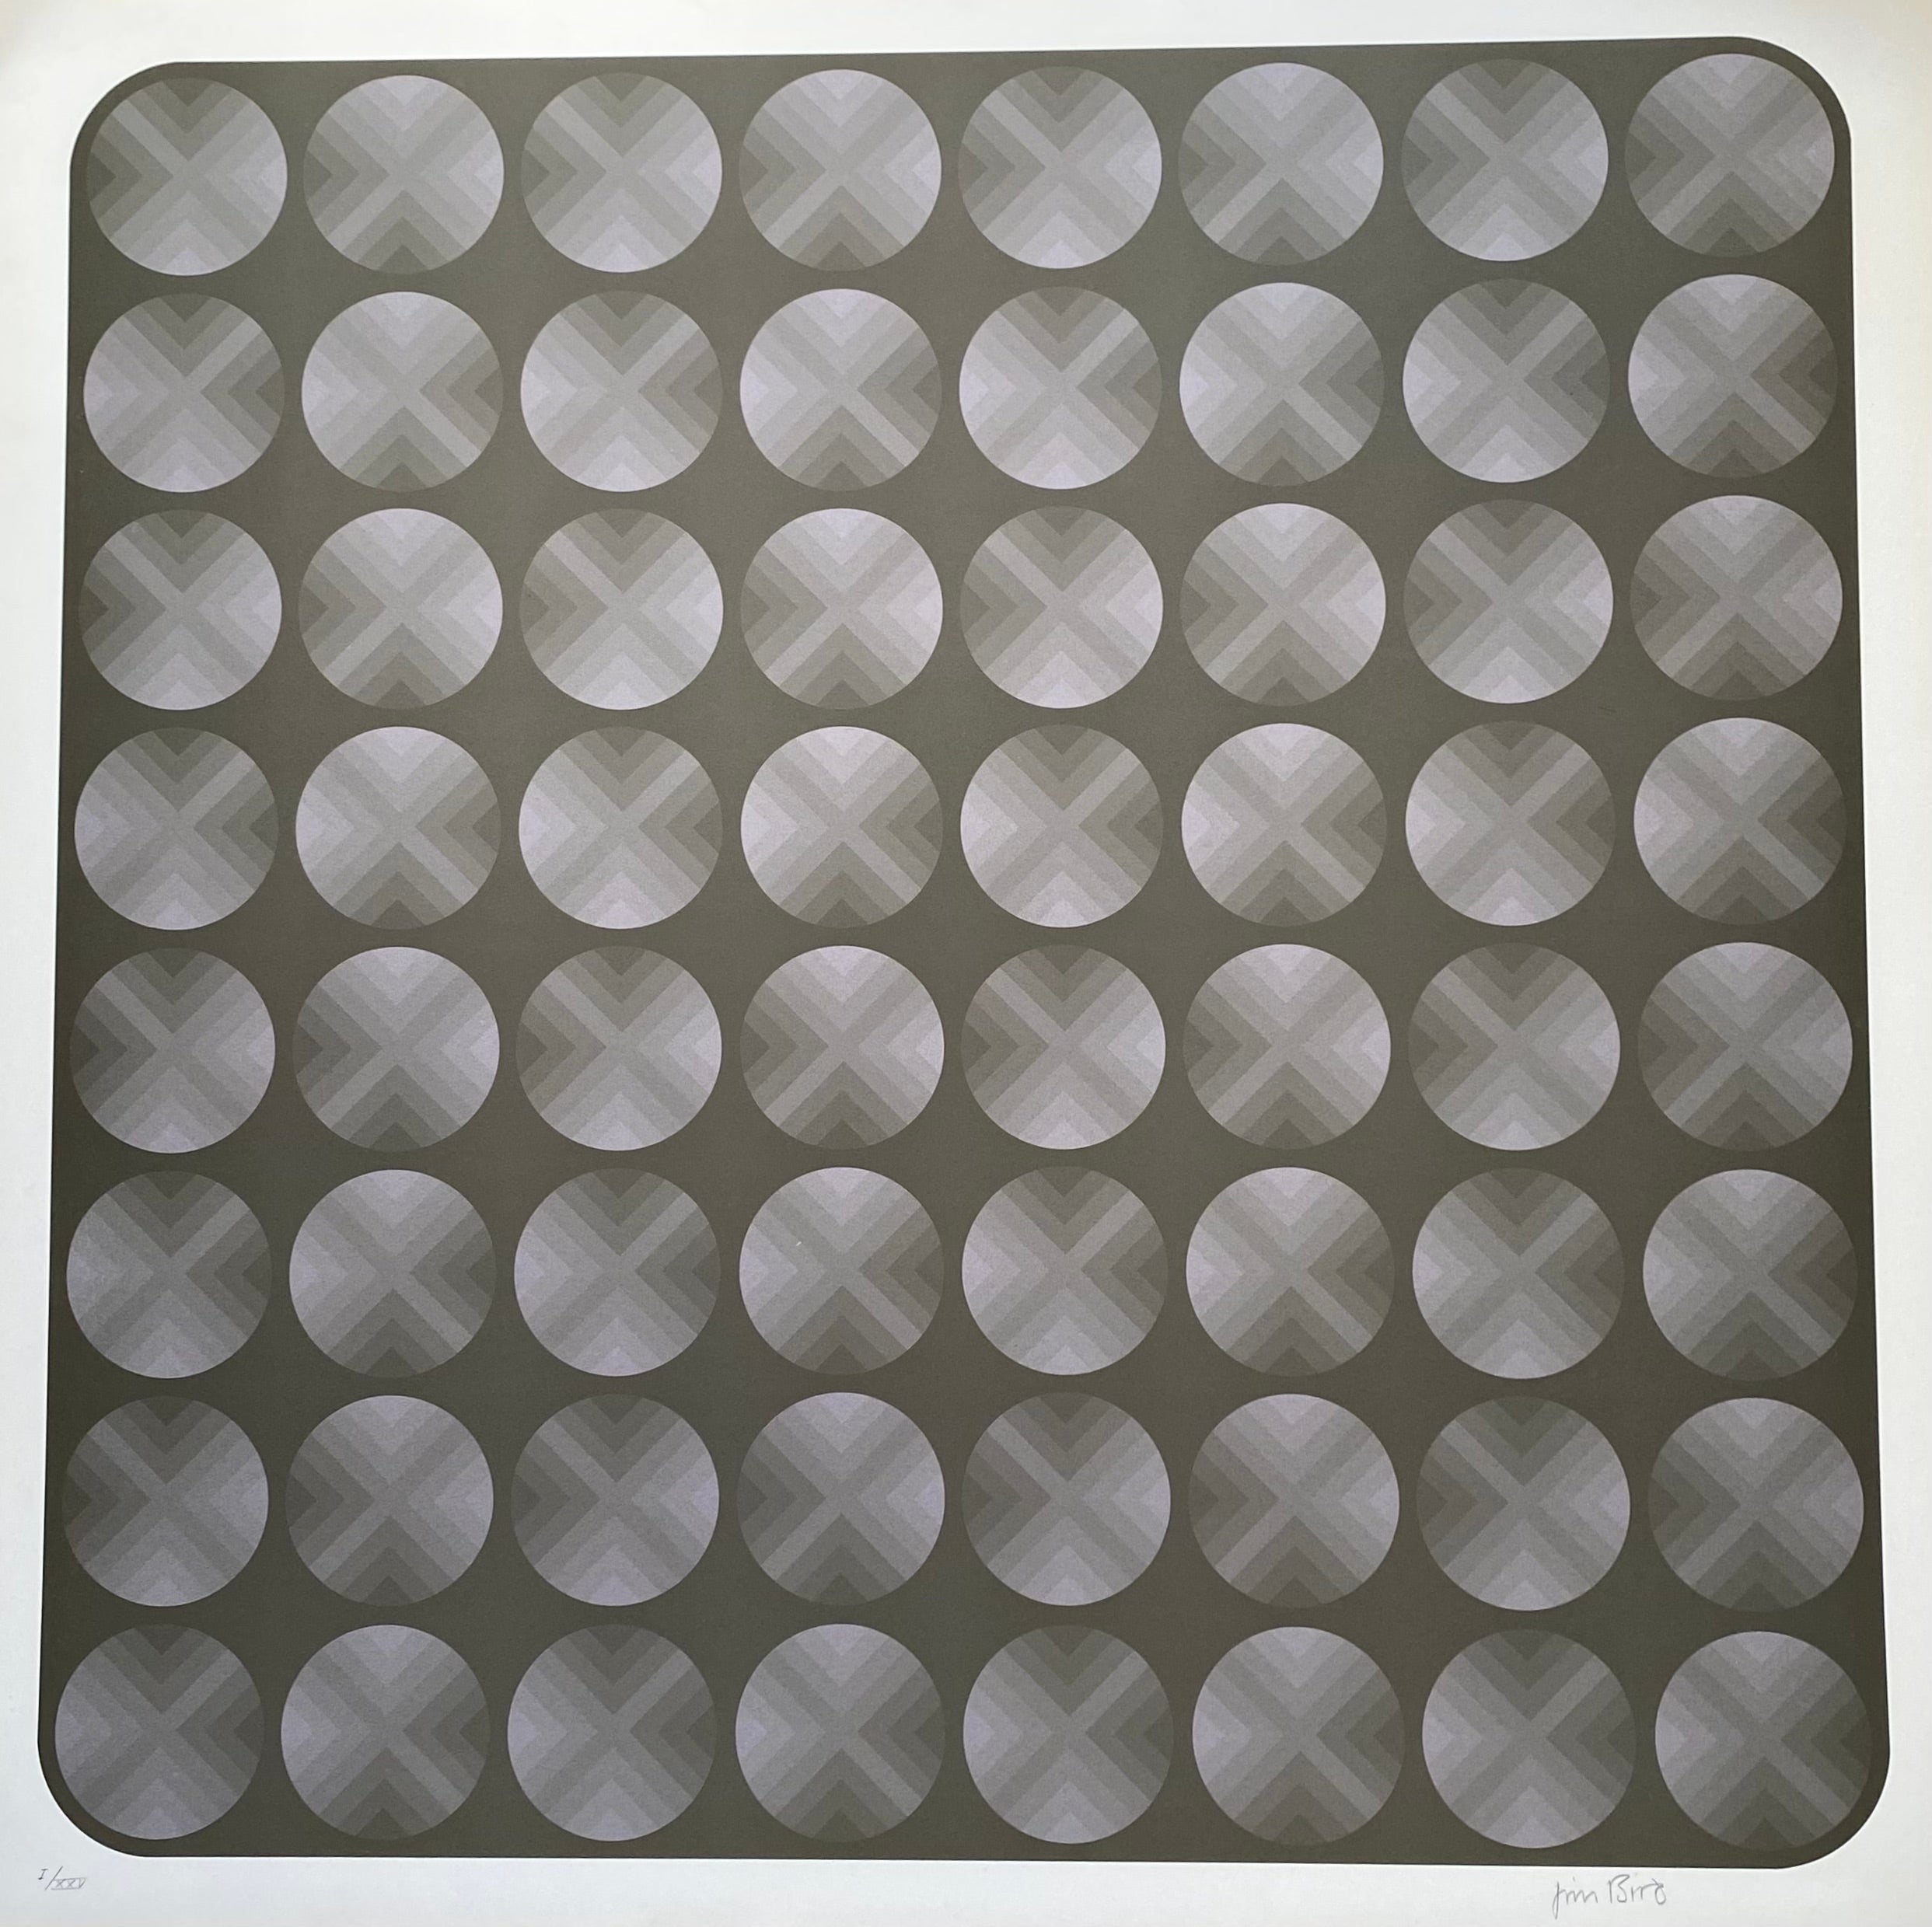 Jim Bird - tribute to Vasarely 
Photolithography
Circa 1970
Signed 
Paper size : 68×68
Image size : 61×61 
Perfect condition 
Published by Poligrafa, Barcelona